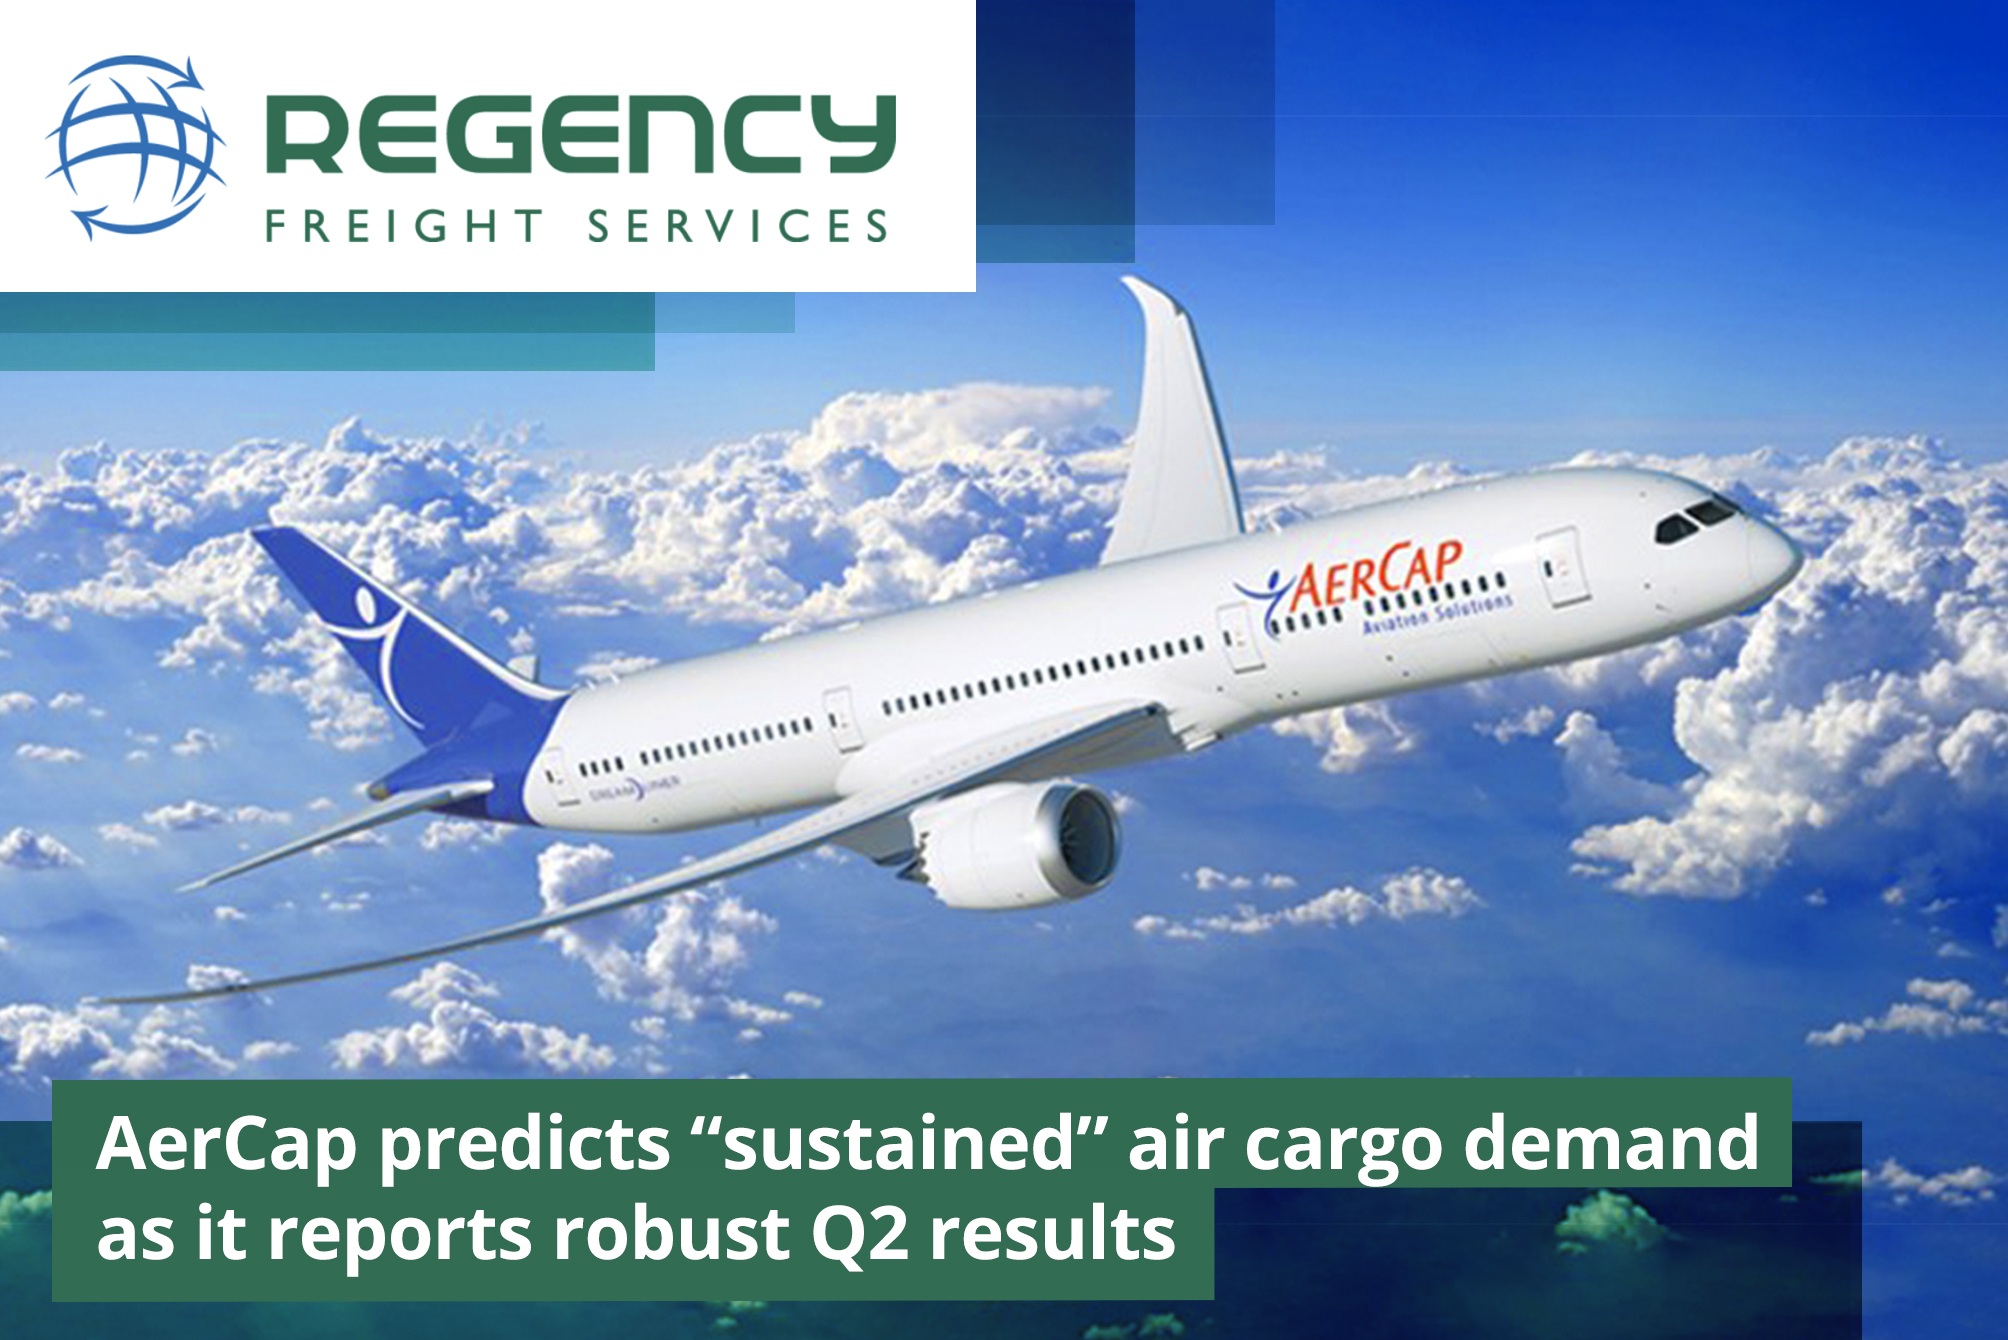 Worlds largest ocean freight carrier launches air cargo business